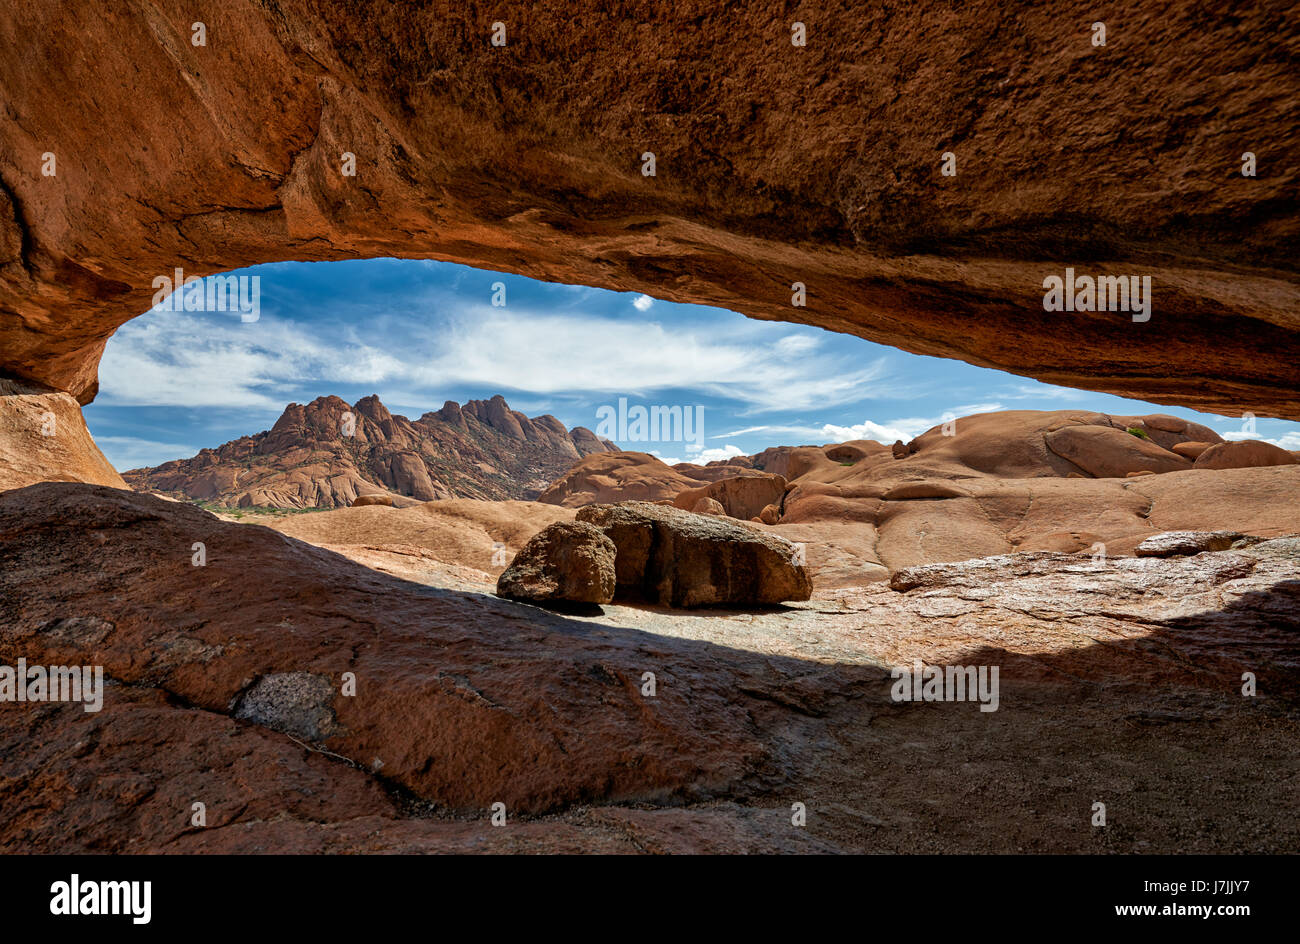 The Arch at Spitzkoppe, mountain landscape of granite rocks, Matterhorn of Namibia, Namibia, Africa Stock Photo